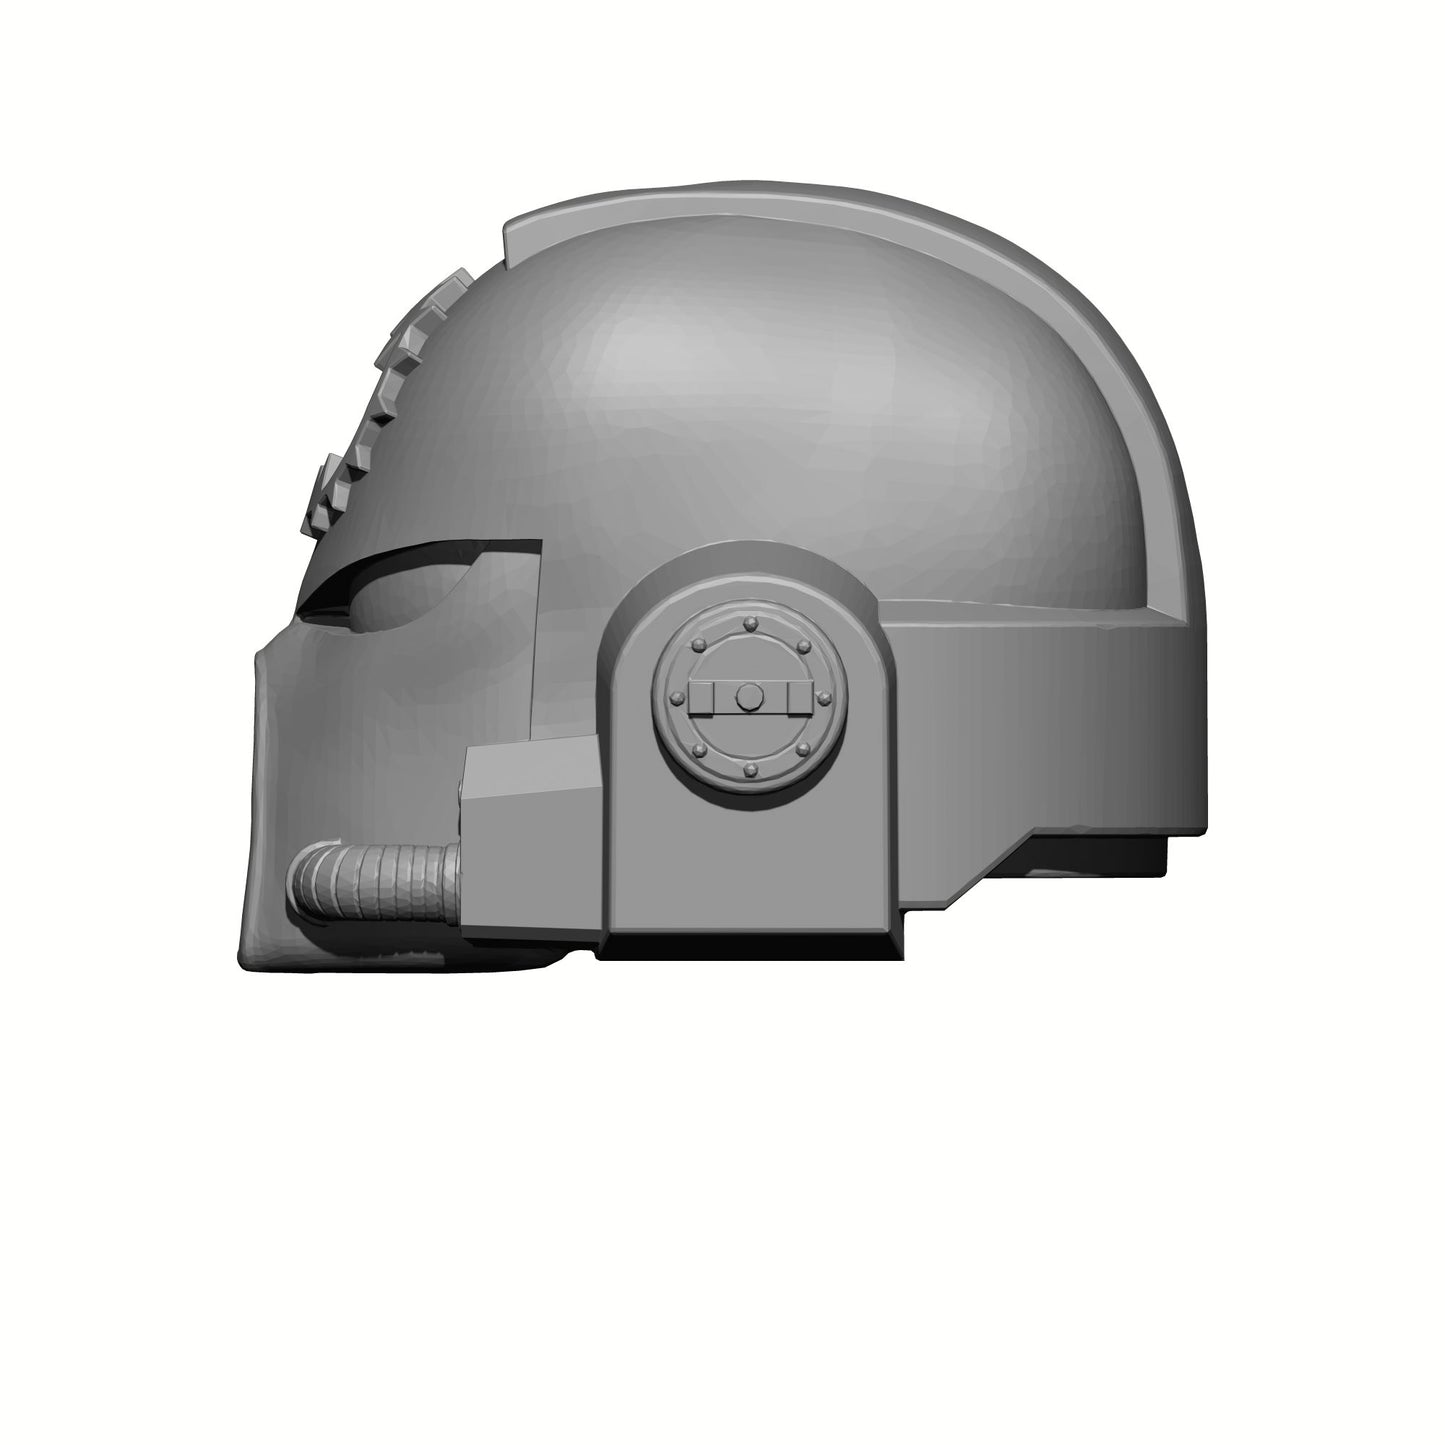 Left Angle World Eater Chapter MKVII Helmet Compatible with McFarlane Space Marine Action Figures